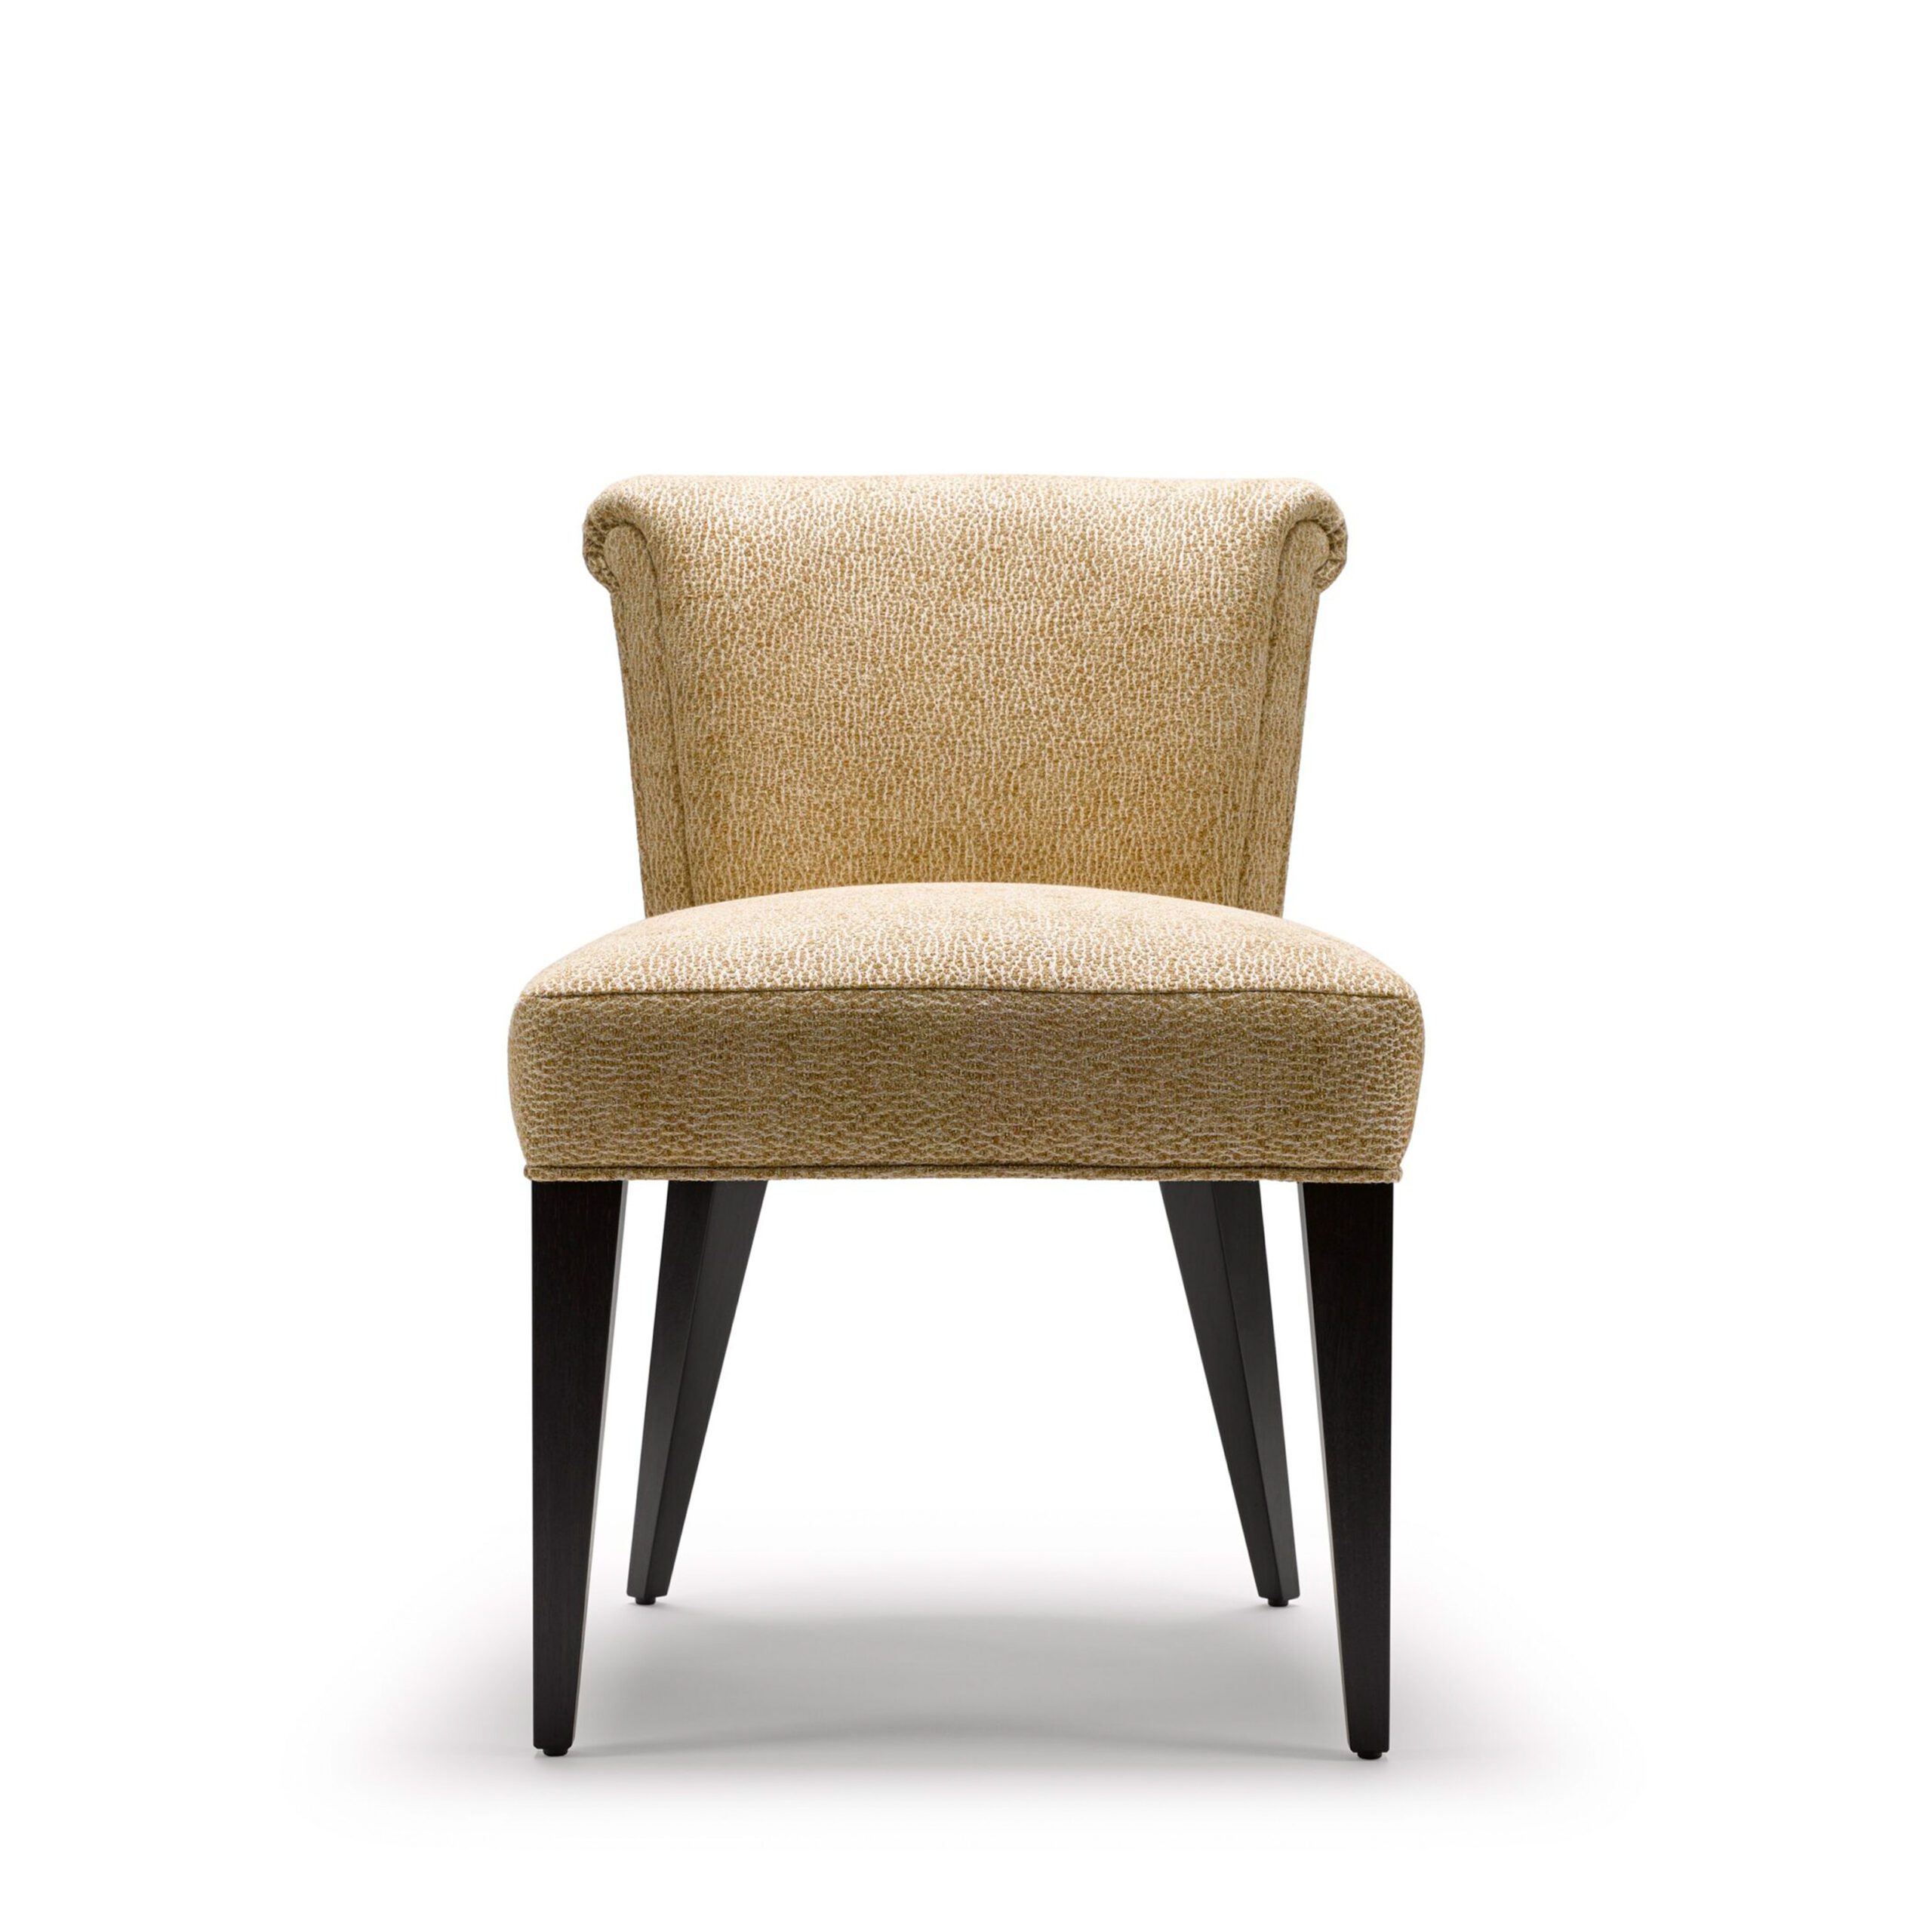 Eto Dining Chair - Shown here upholstered in Jim Thompson Galuchat Burnished Gold, with legs in black lacquered walnut.